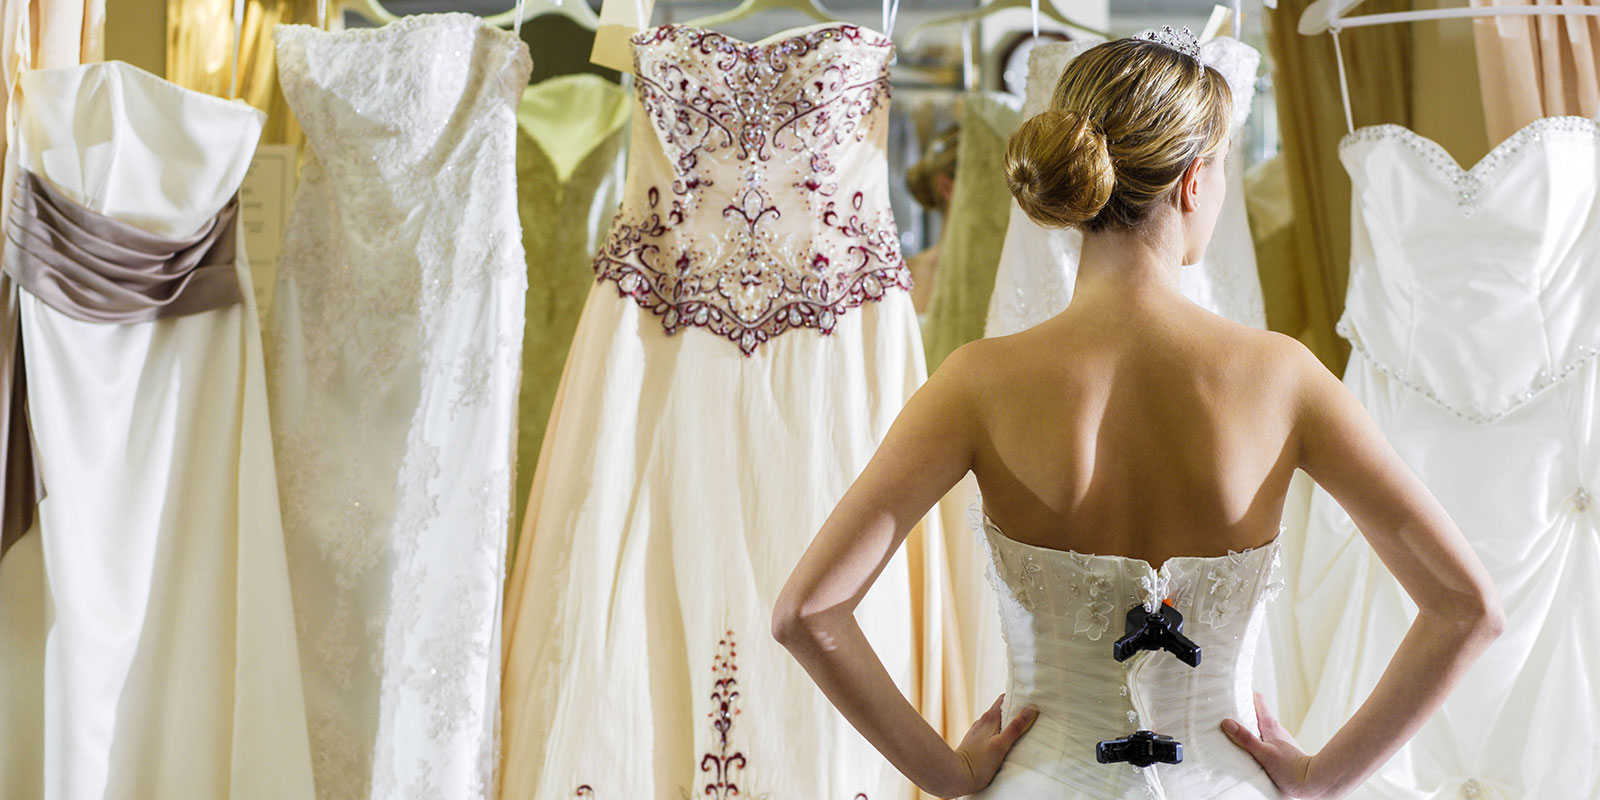 Plan before you shop for a wedding dress